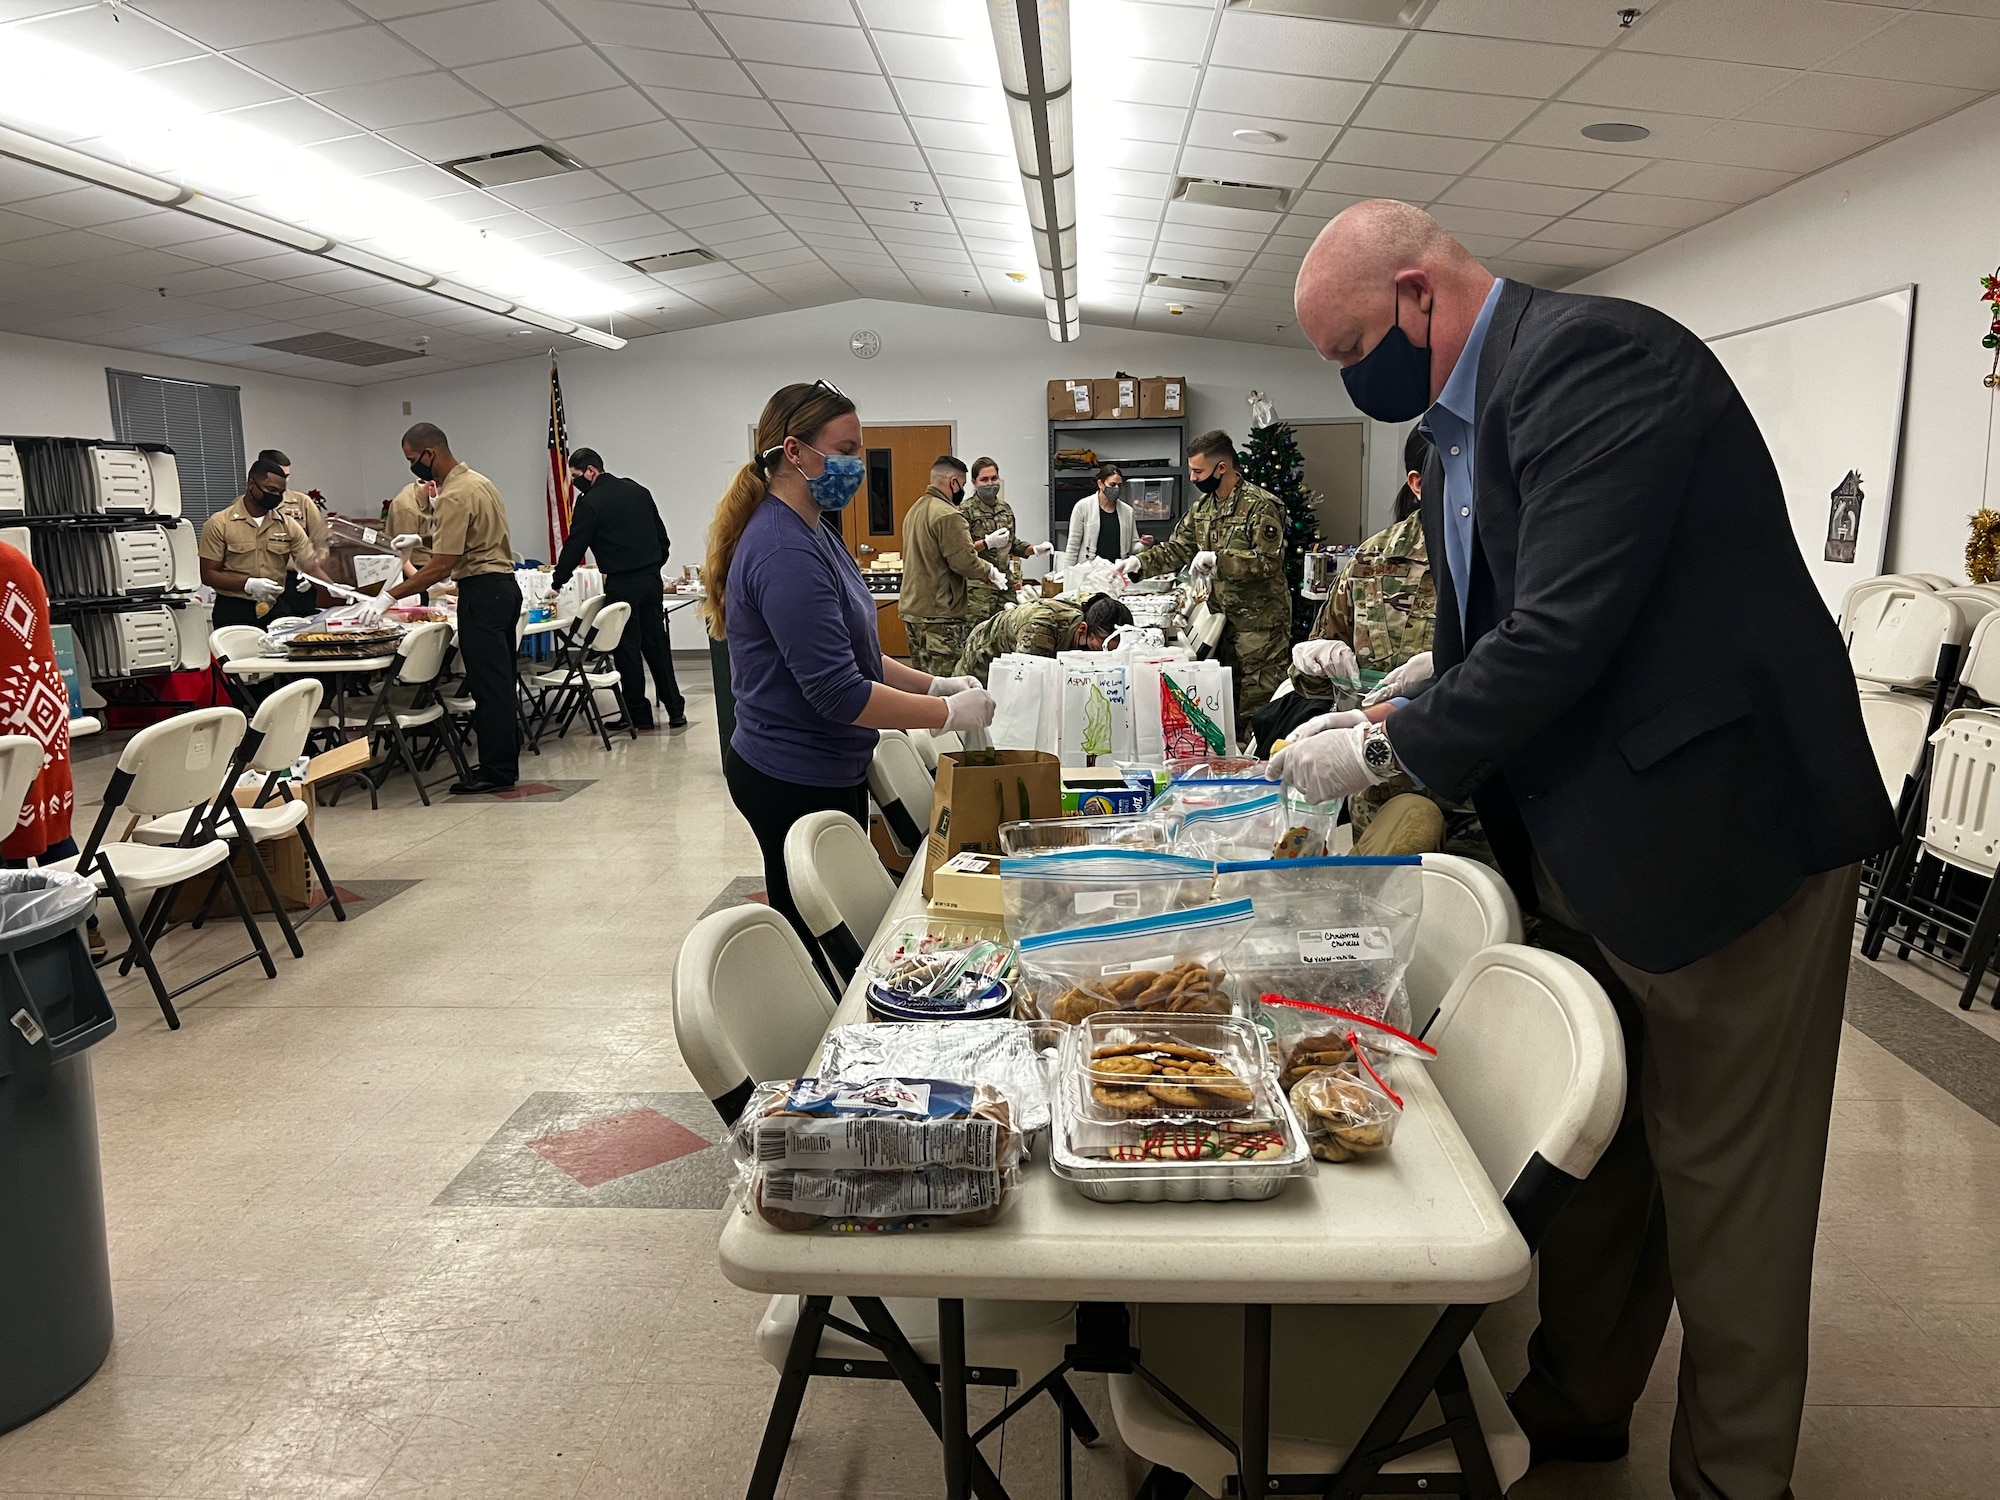 Goodfellow members pack cookies during the Cookie Caper event, Dec. 7, 2021, on Goodfellow Air Force Base, Texas. The Cookie Caper is a coordinated event organized by the base community each year. (Courtesy photo)